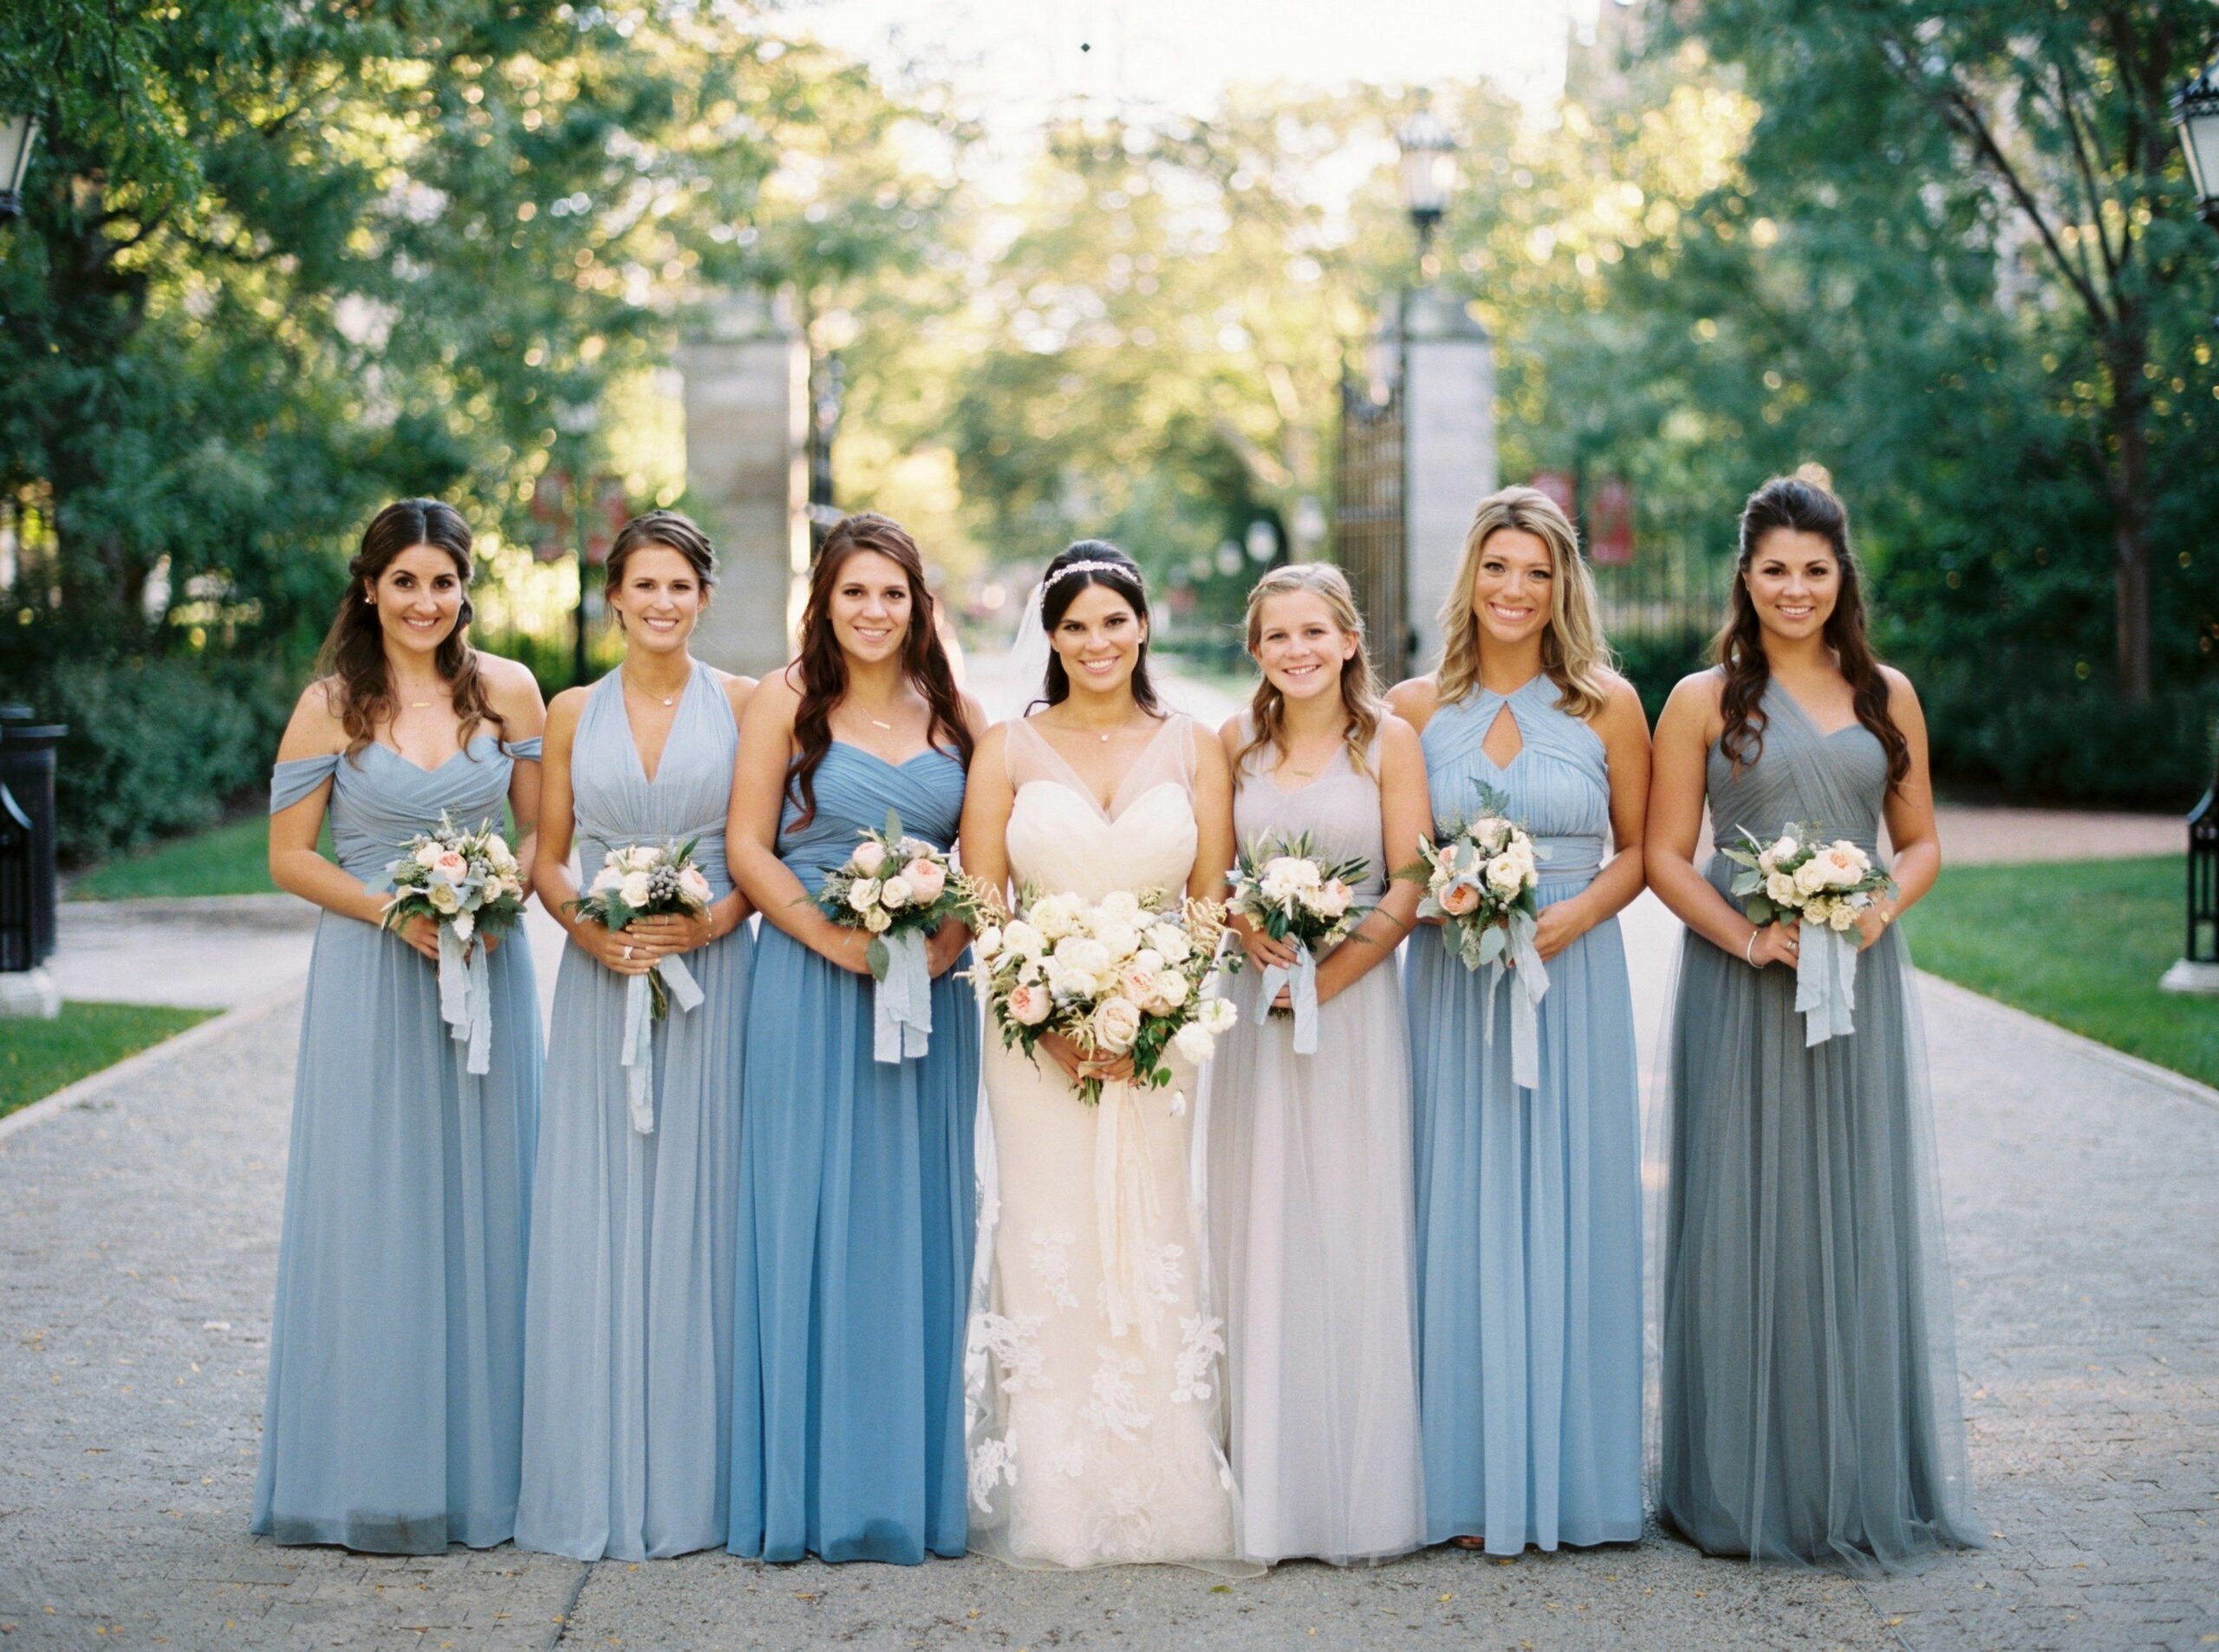 here are my thoughts: How to Say No to Being a Bridesmaid